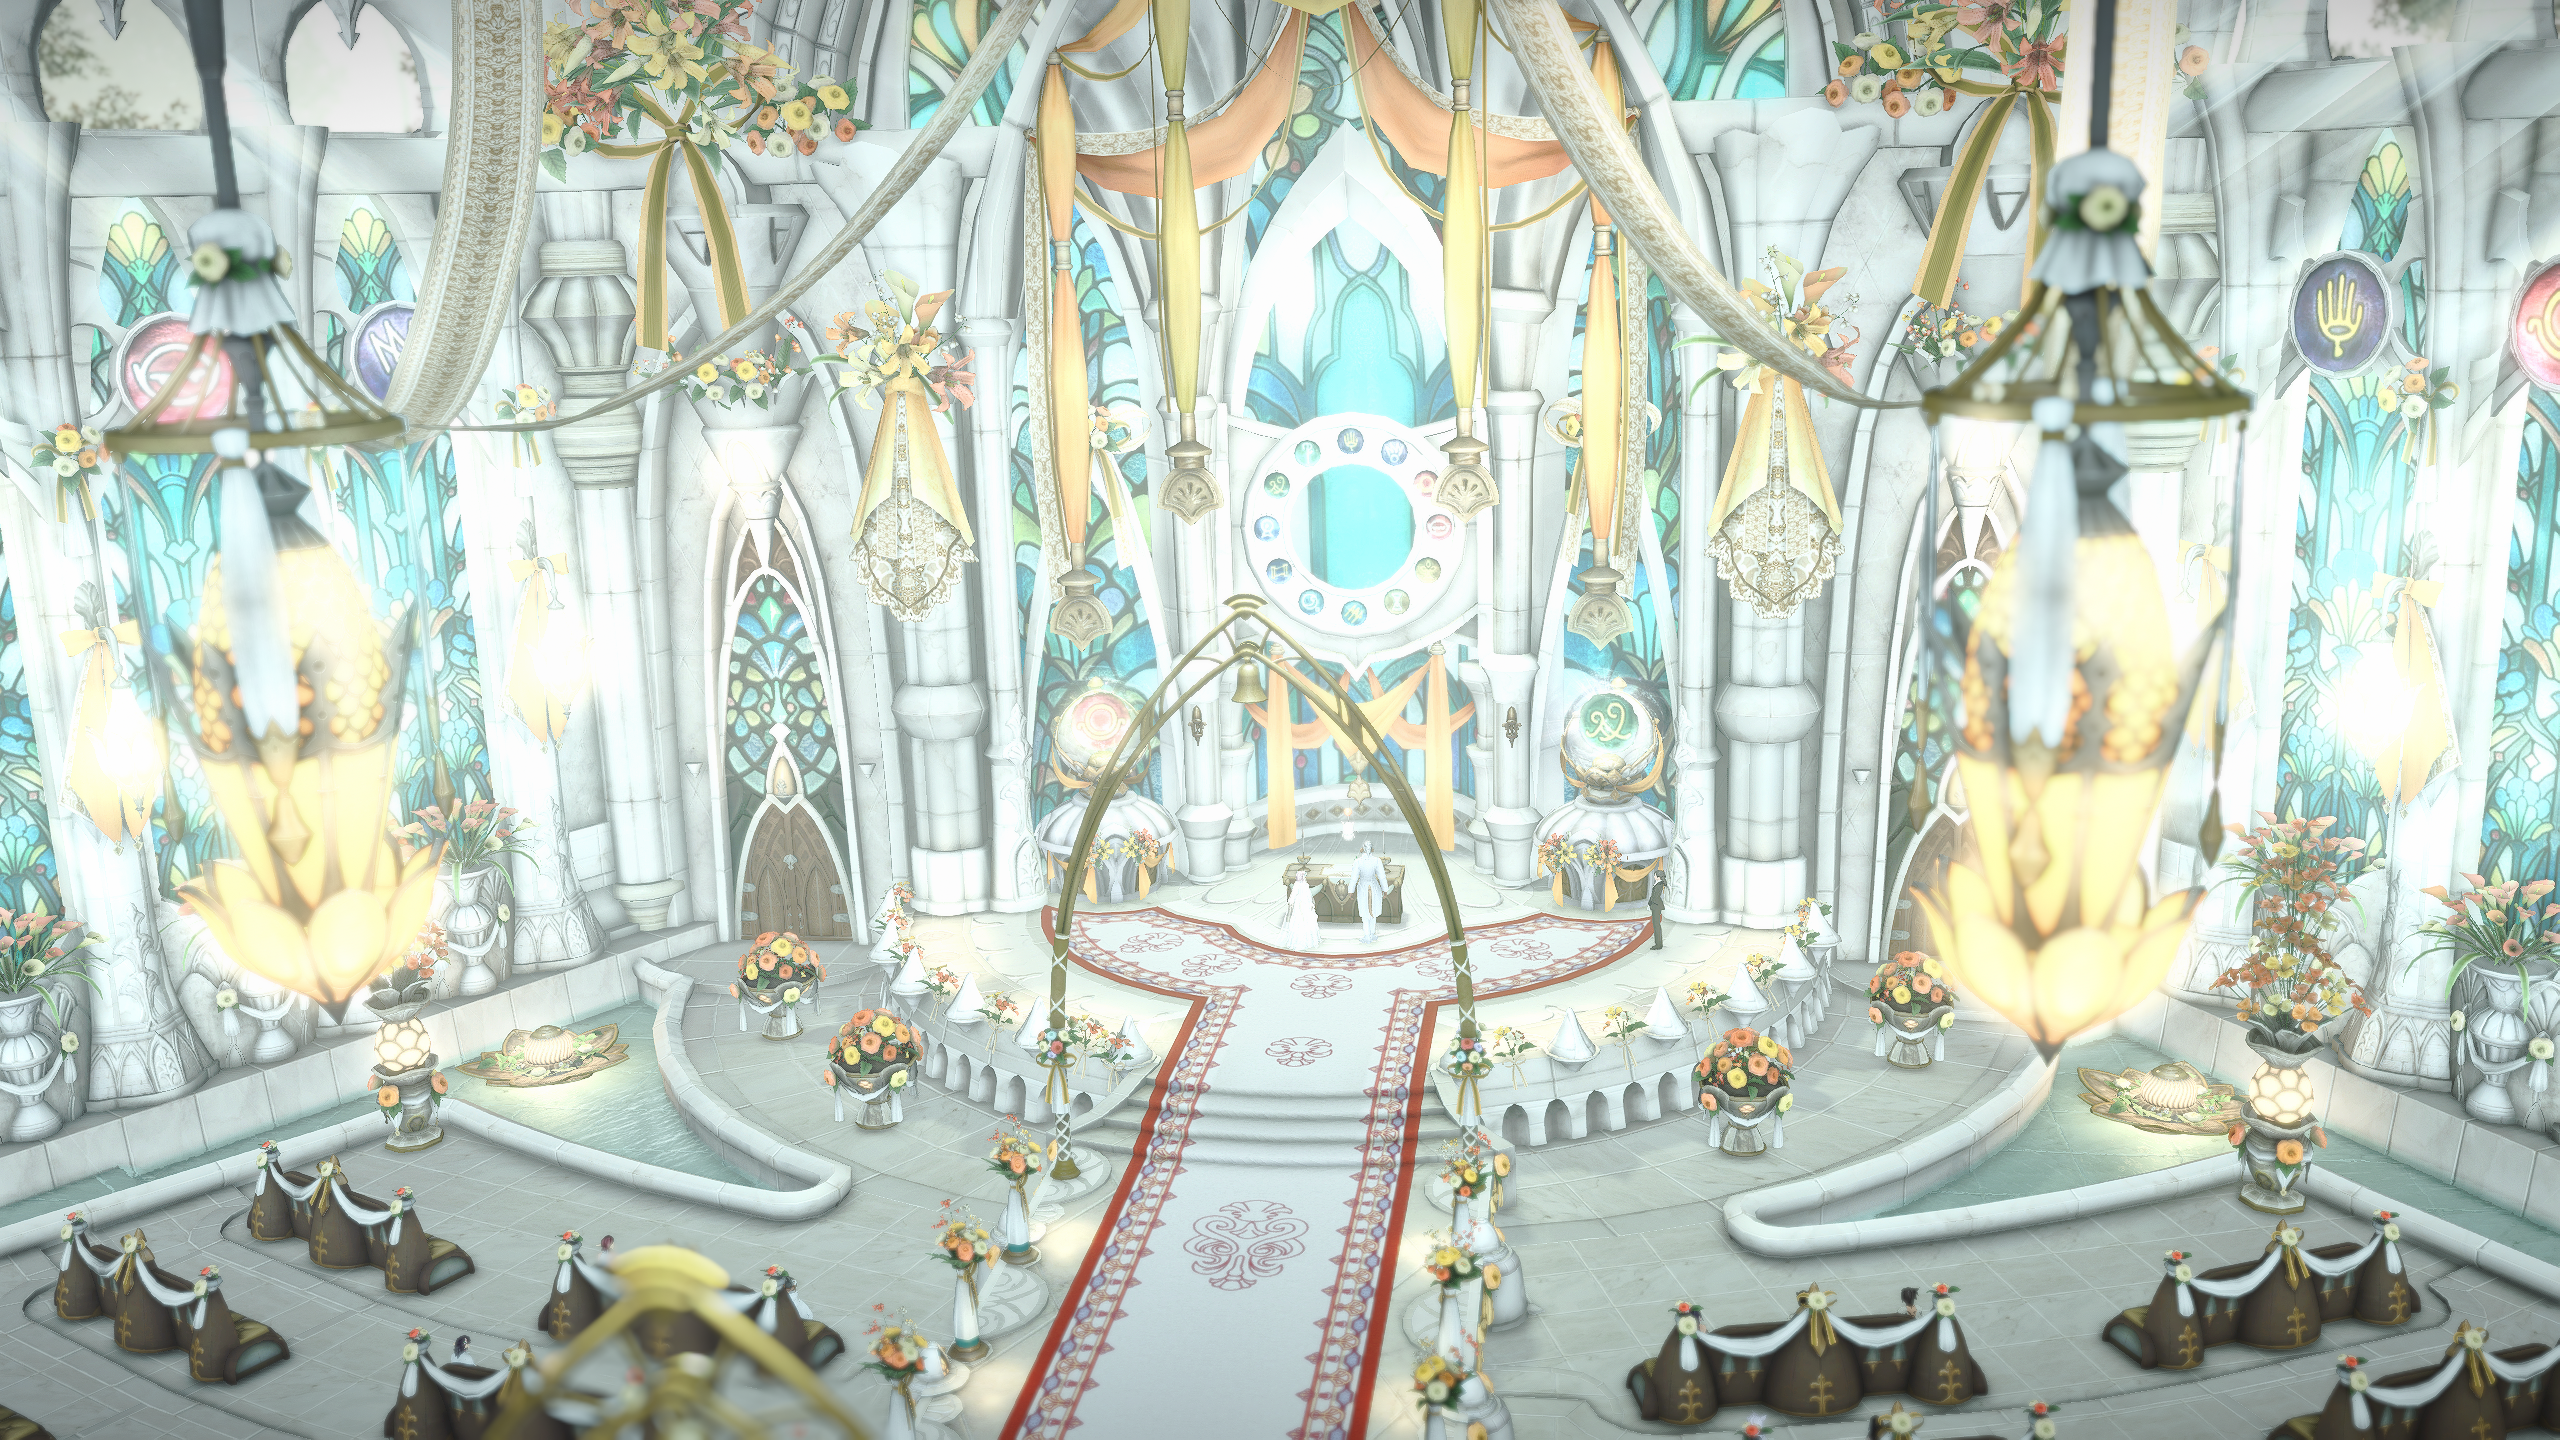 Final Fantasy XiV A Realm Reborn Reshade Weddings Church Interior Stained Glass Flowers Video Games  2560x1440